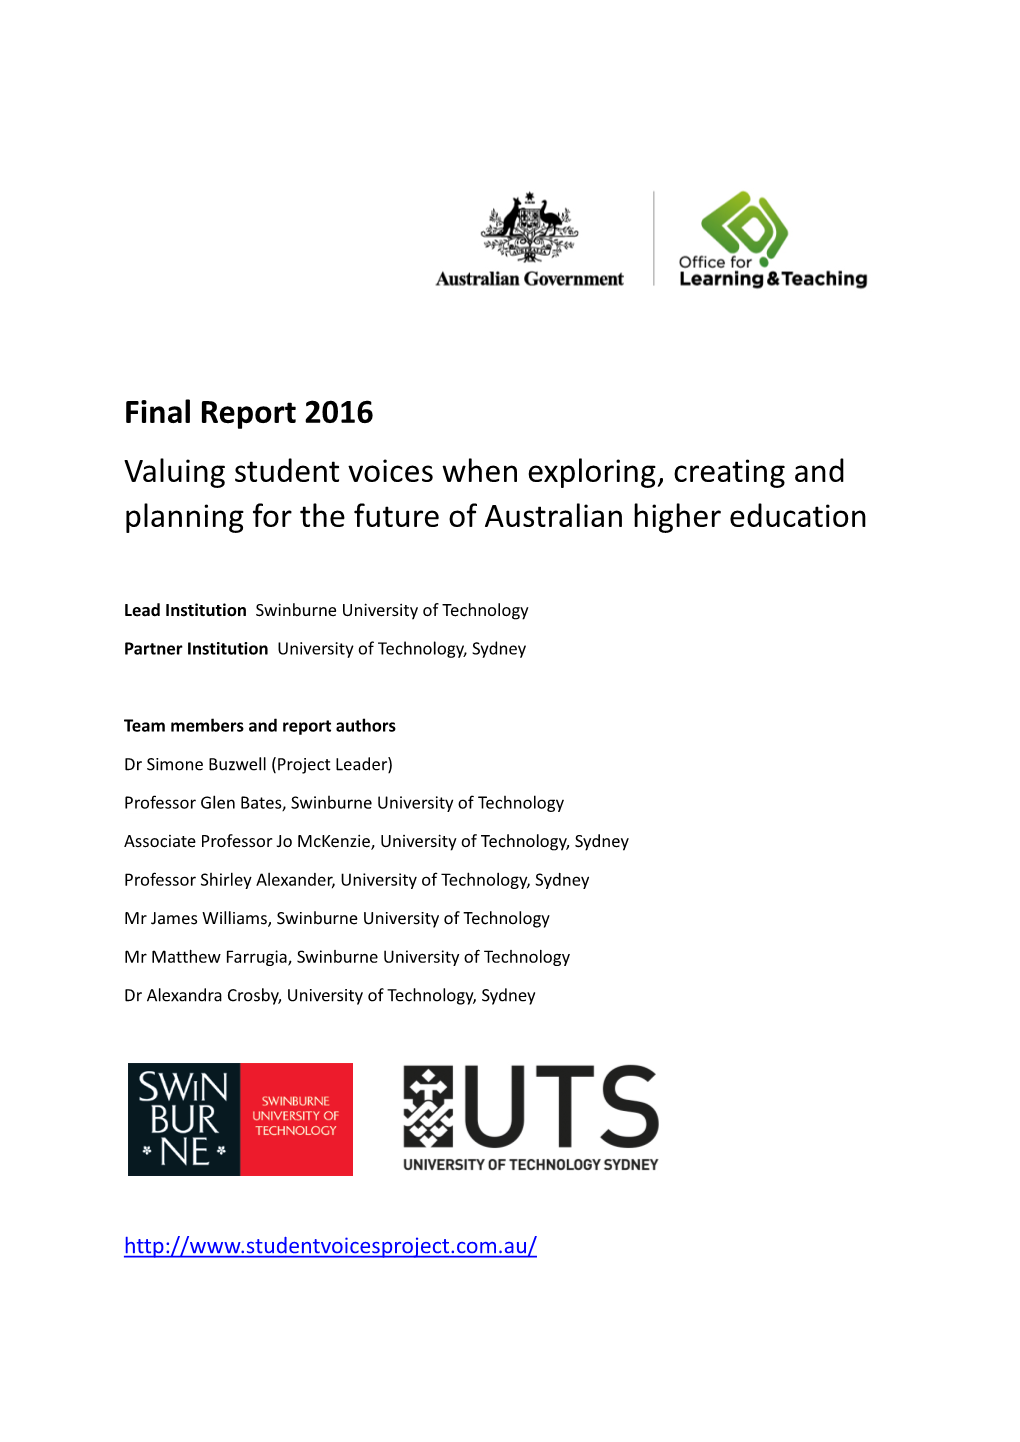 Valuing Student Voices When Exploring, Creating and Planning for the Future of Australian Higher Education